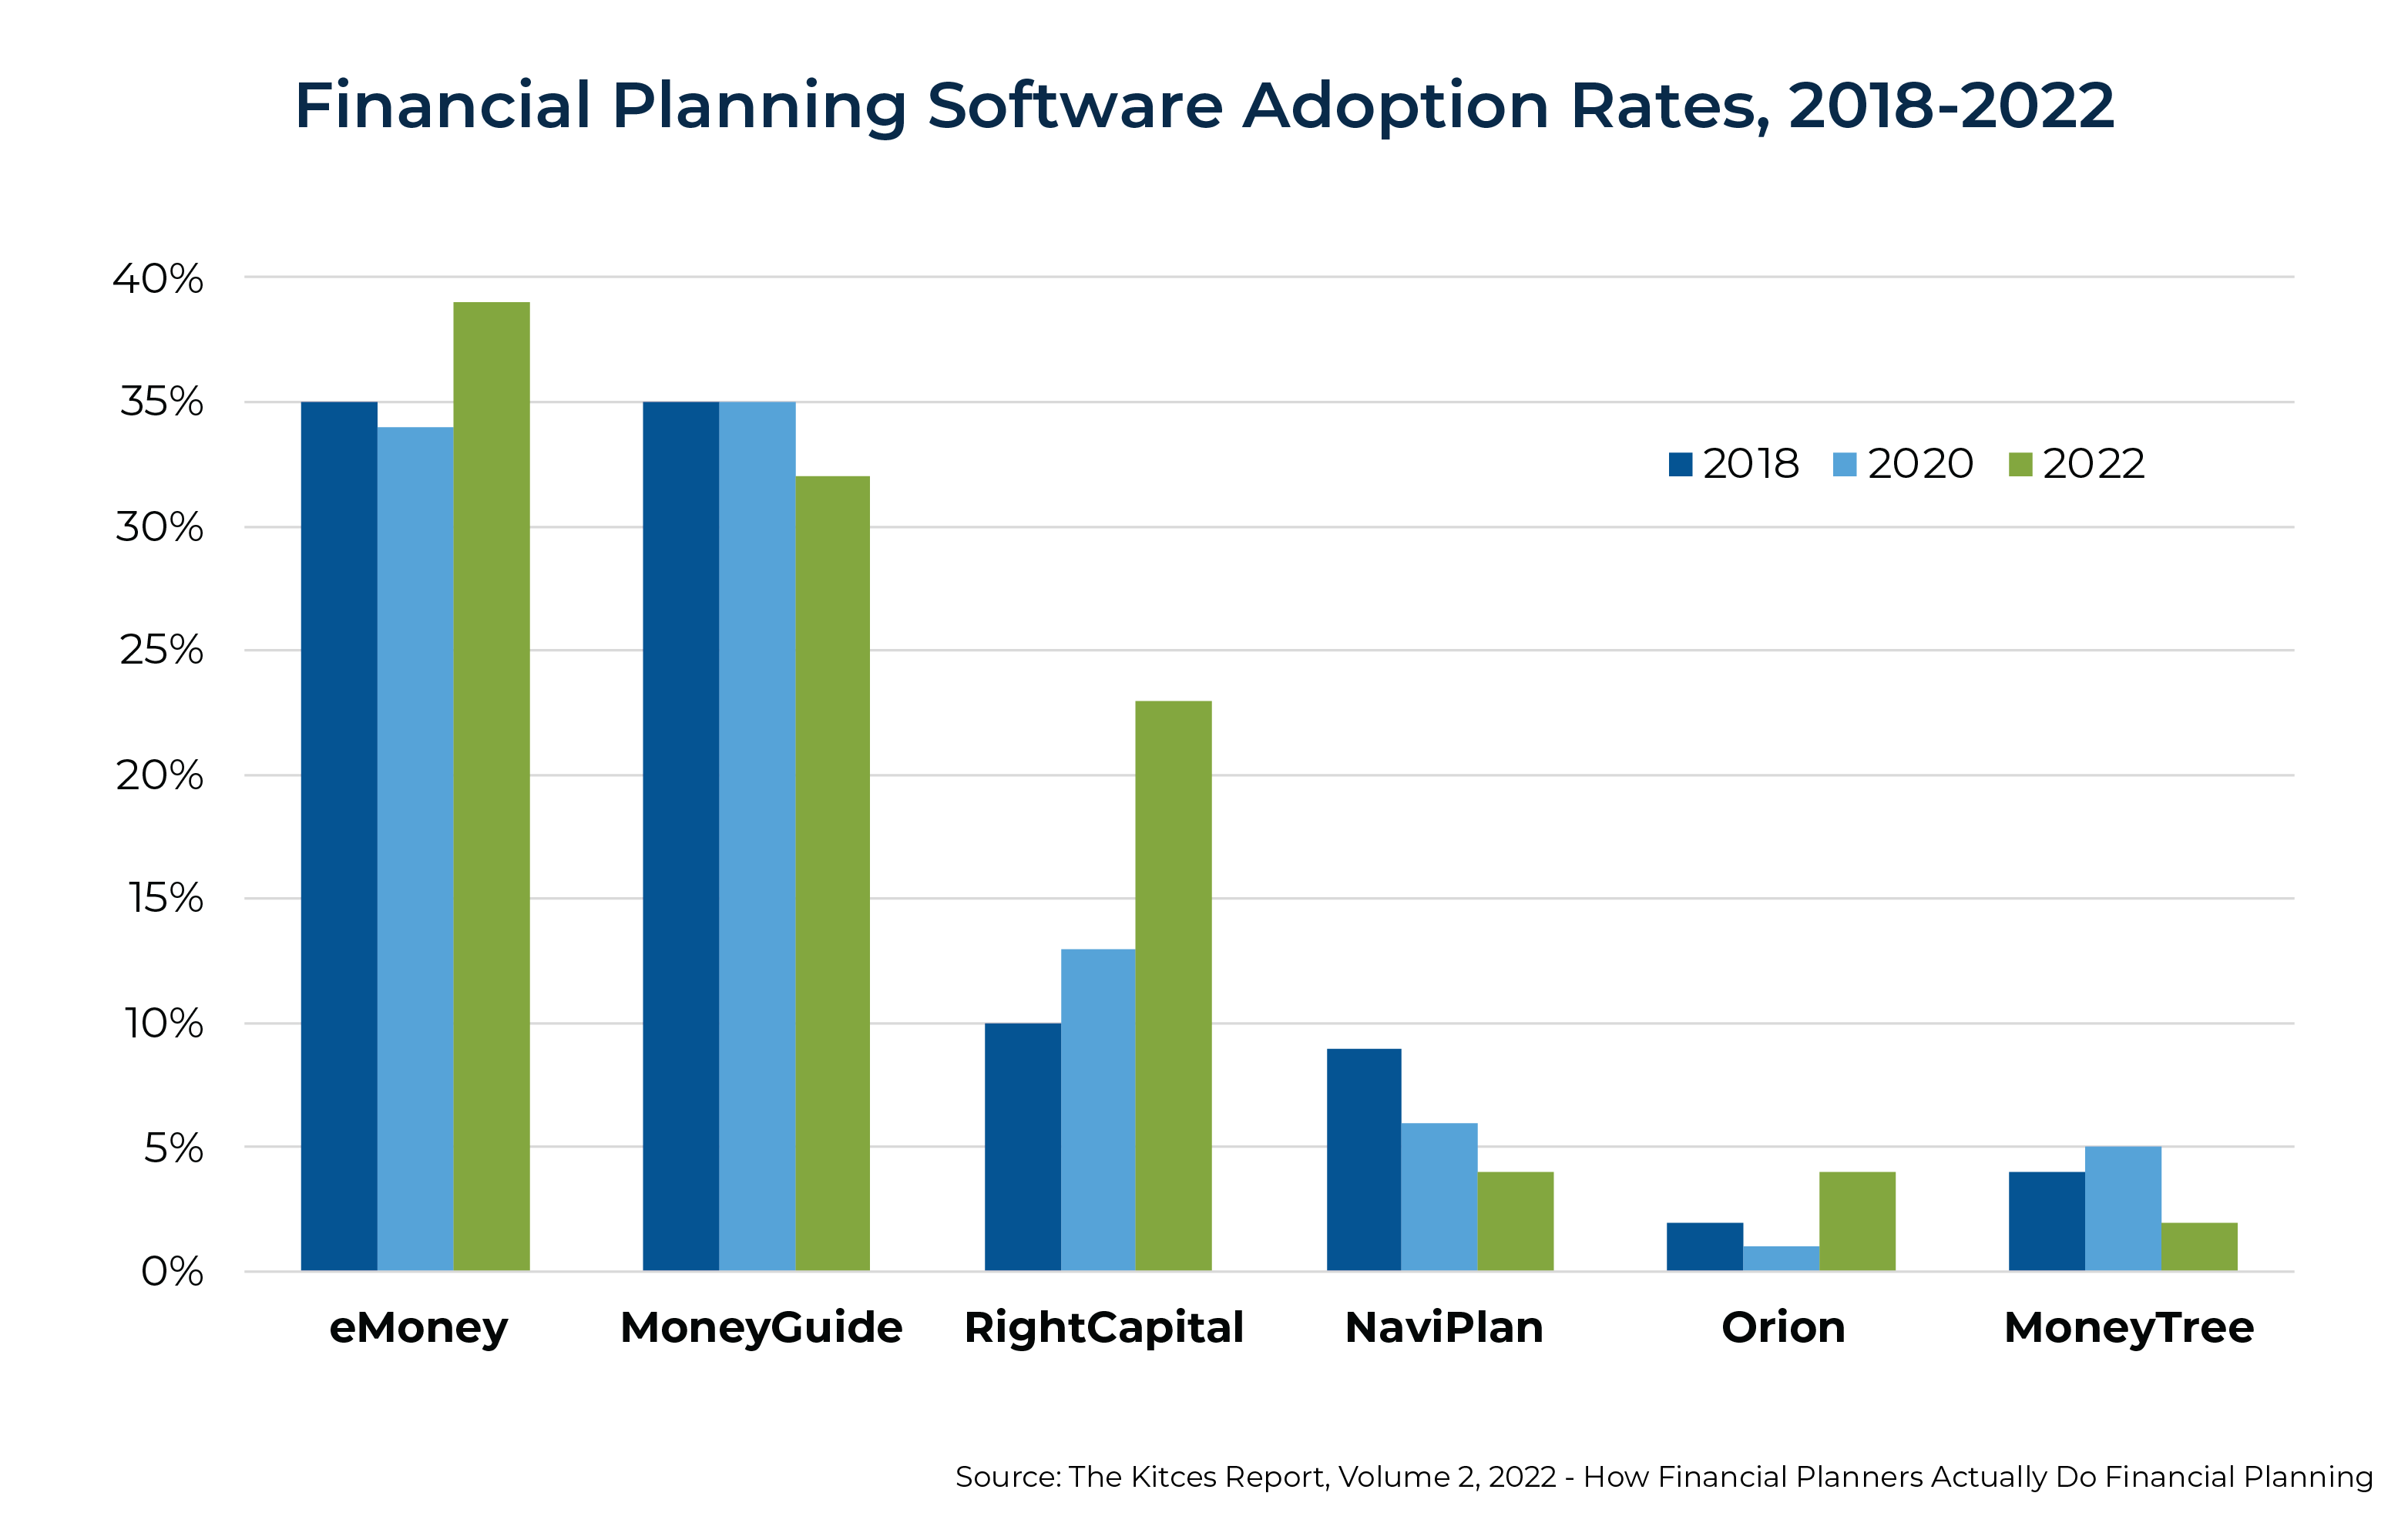 Financial Planning Software Adoption Rates